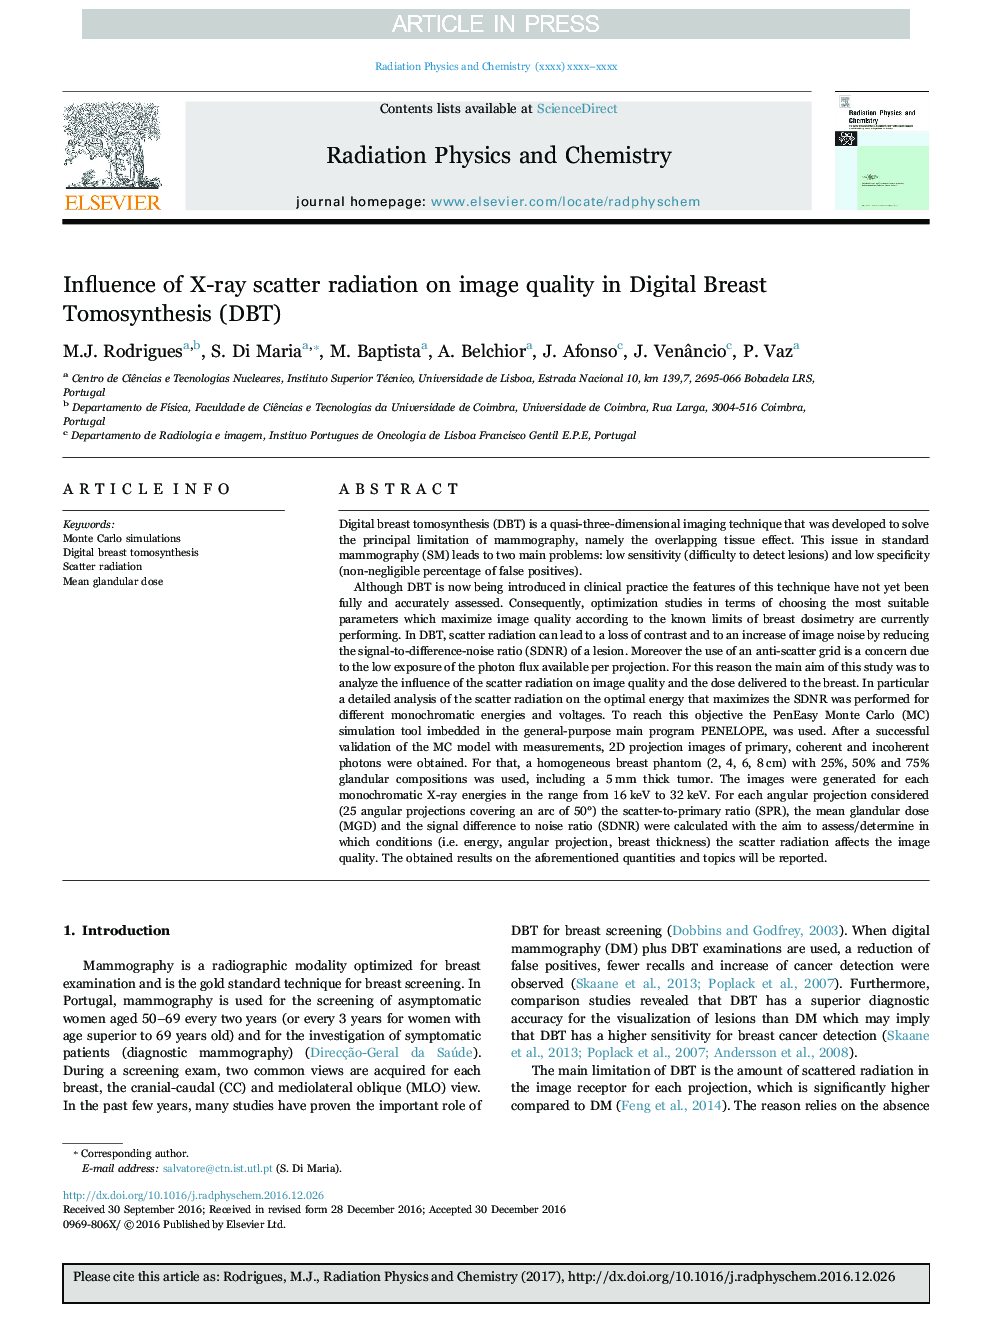 Influence of X-ray scatter radiation on image quality in Digital Breast Tomosynthesis (DBT)